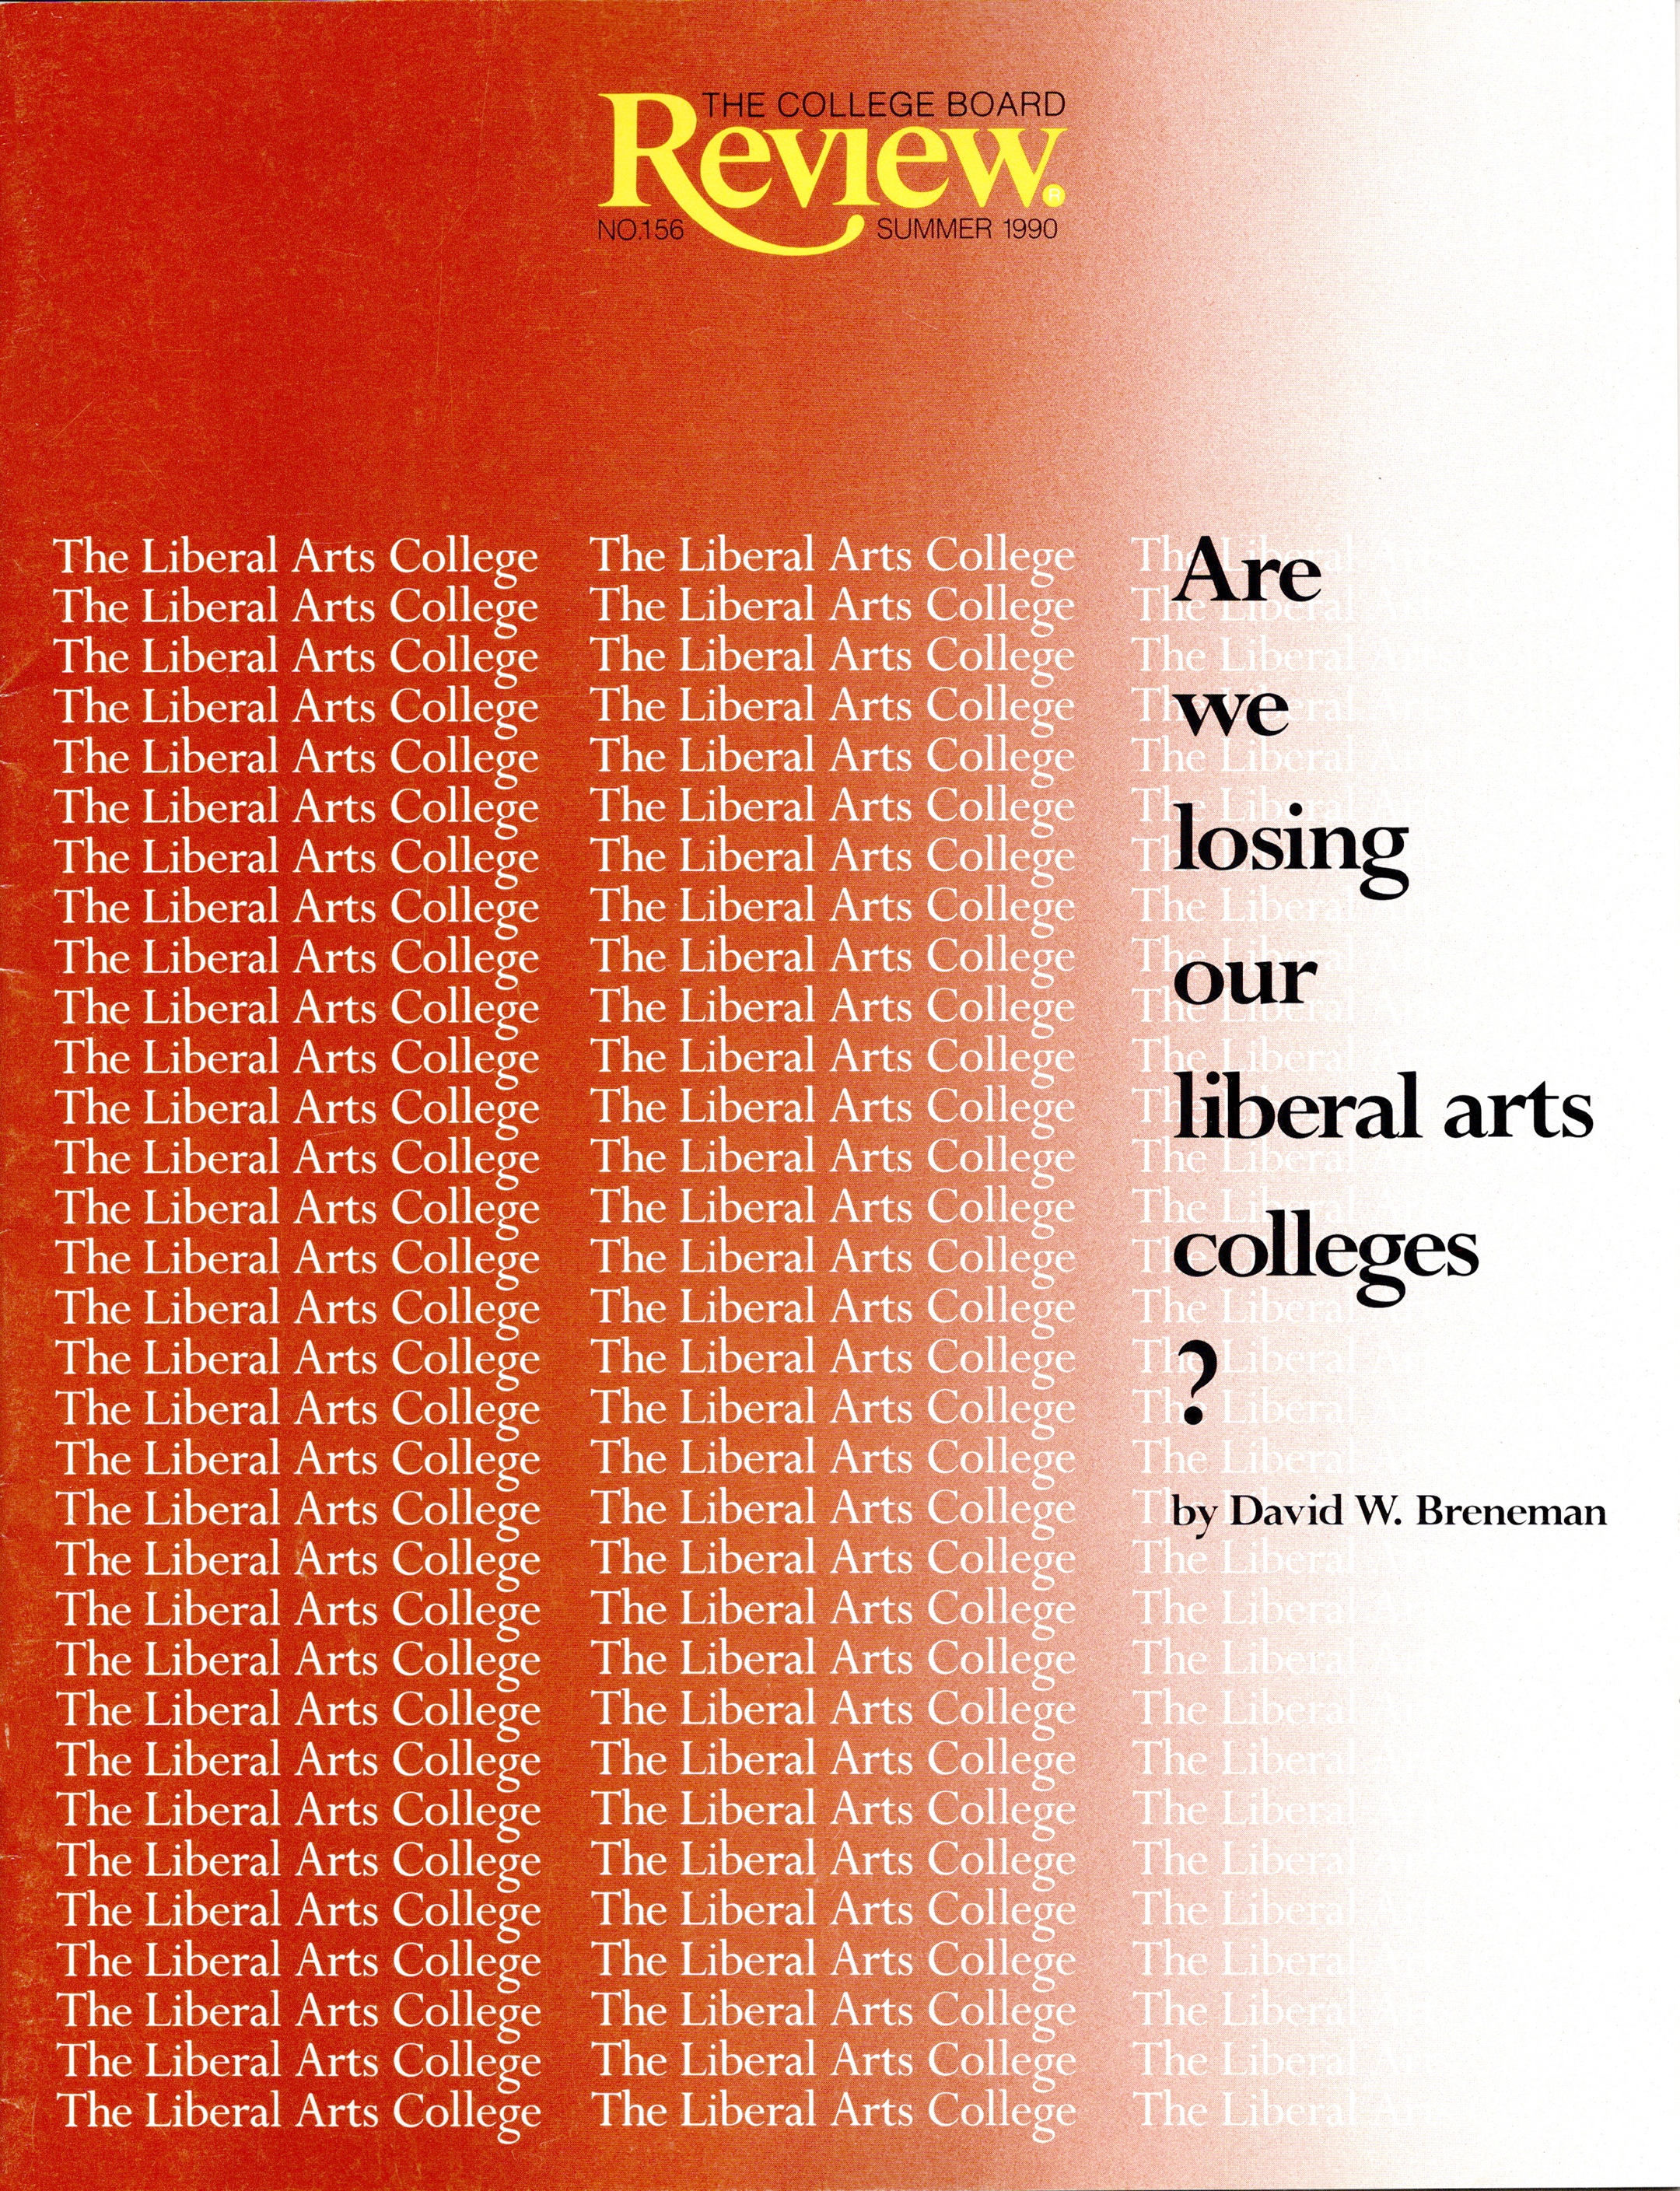 Cover of the summer 1990 issue of the college board review magazine